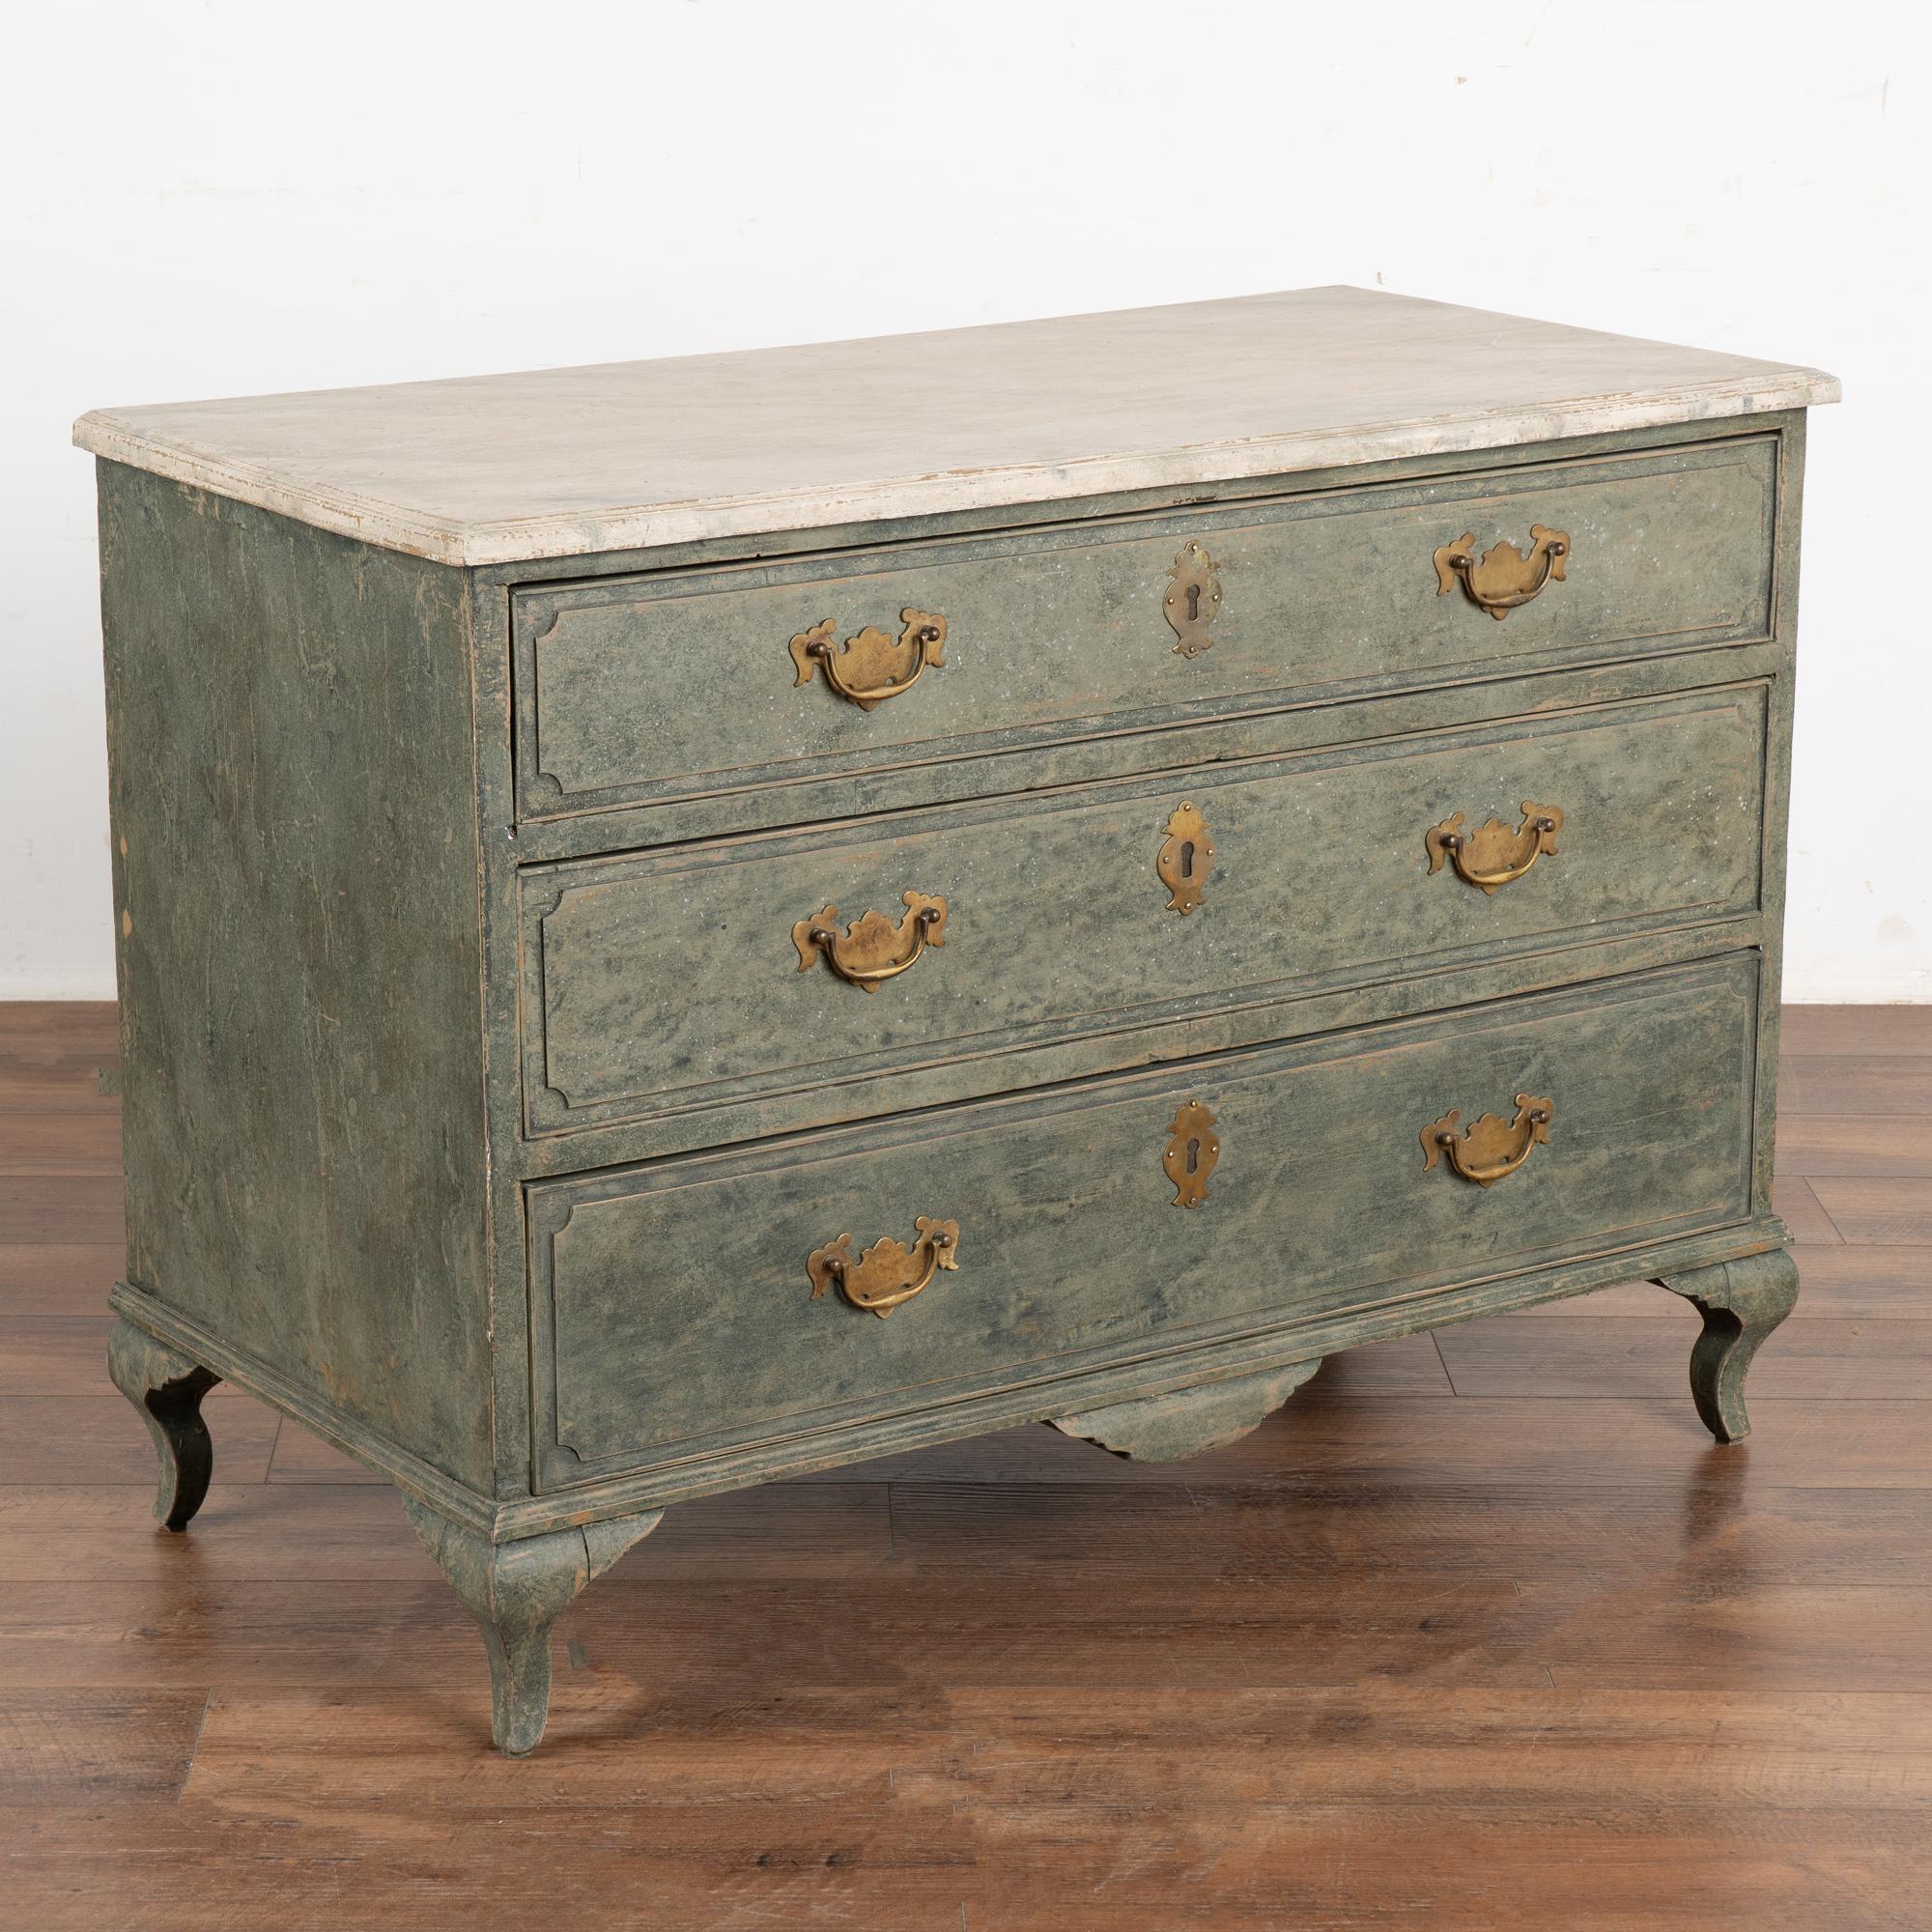 This lovely baroque pine chest of drawers has the clean yet elegant lines that reveal its Swedish country style with simple panel molding along the drawers, a carved element along the skirt all resting on cabriolet legs.
Restored, later